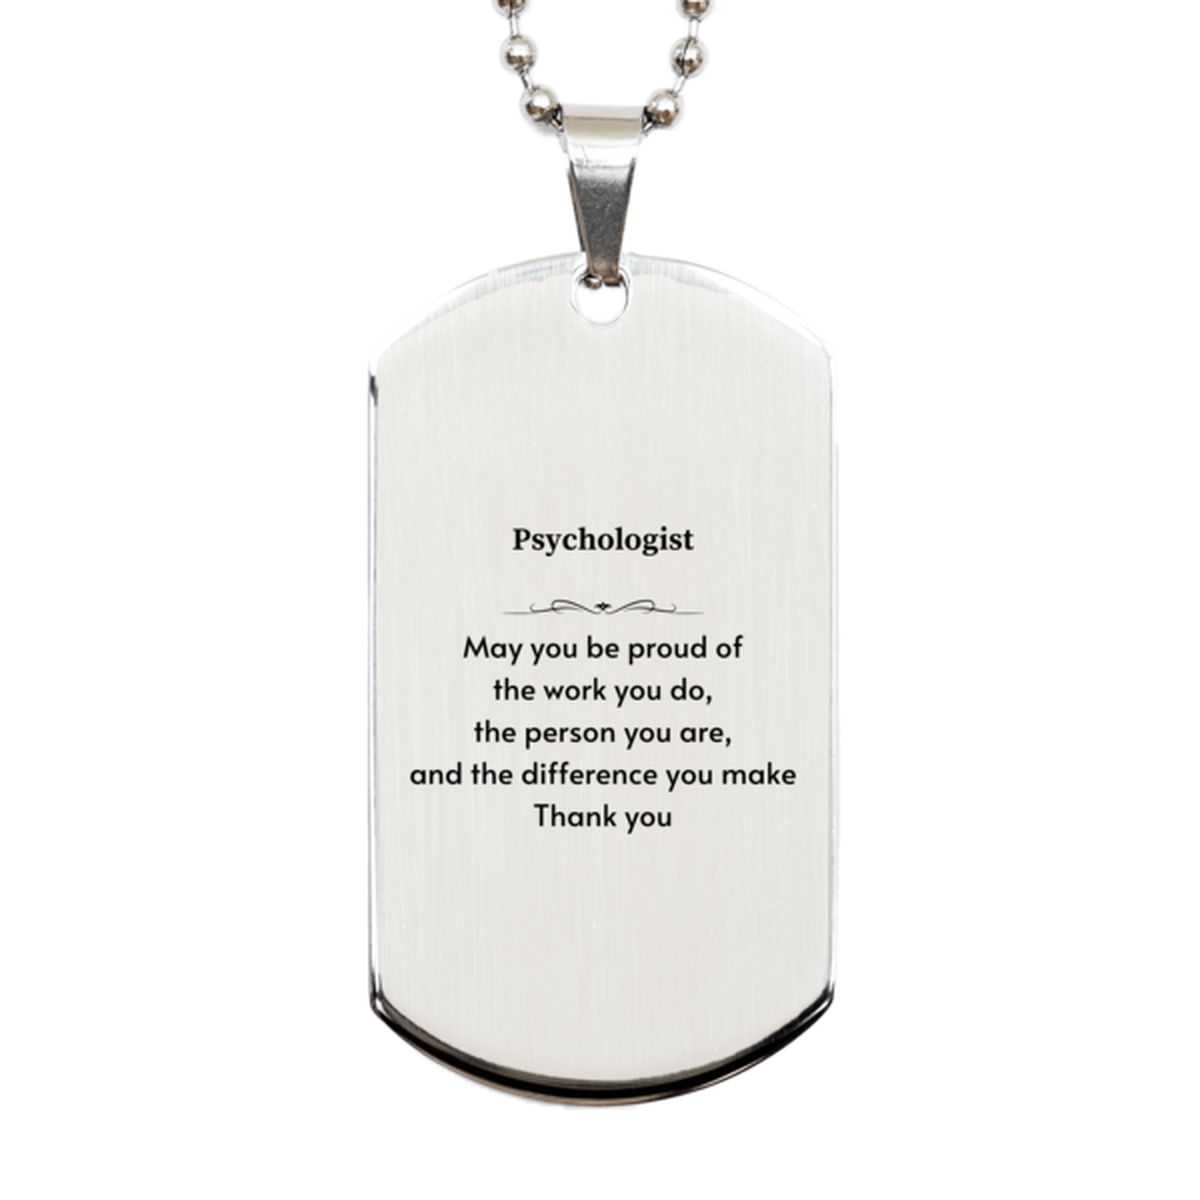 Heartwarming Silver Dog Tag Retirement Coworkers Gifts for Psychologist, Psychologist May You be proud of the work you do, the person you are Gifts for Boss Men Women Friends